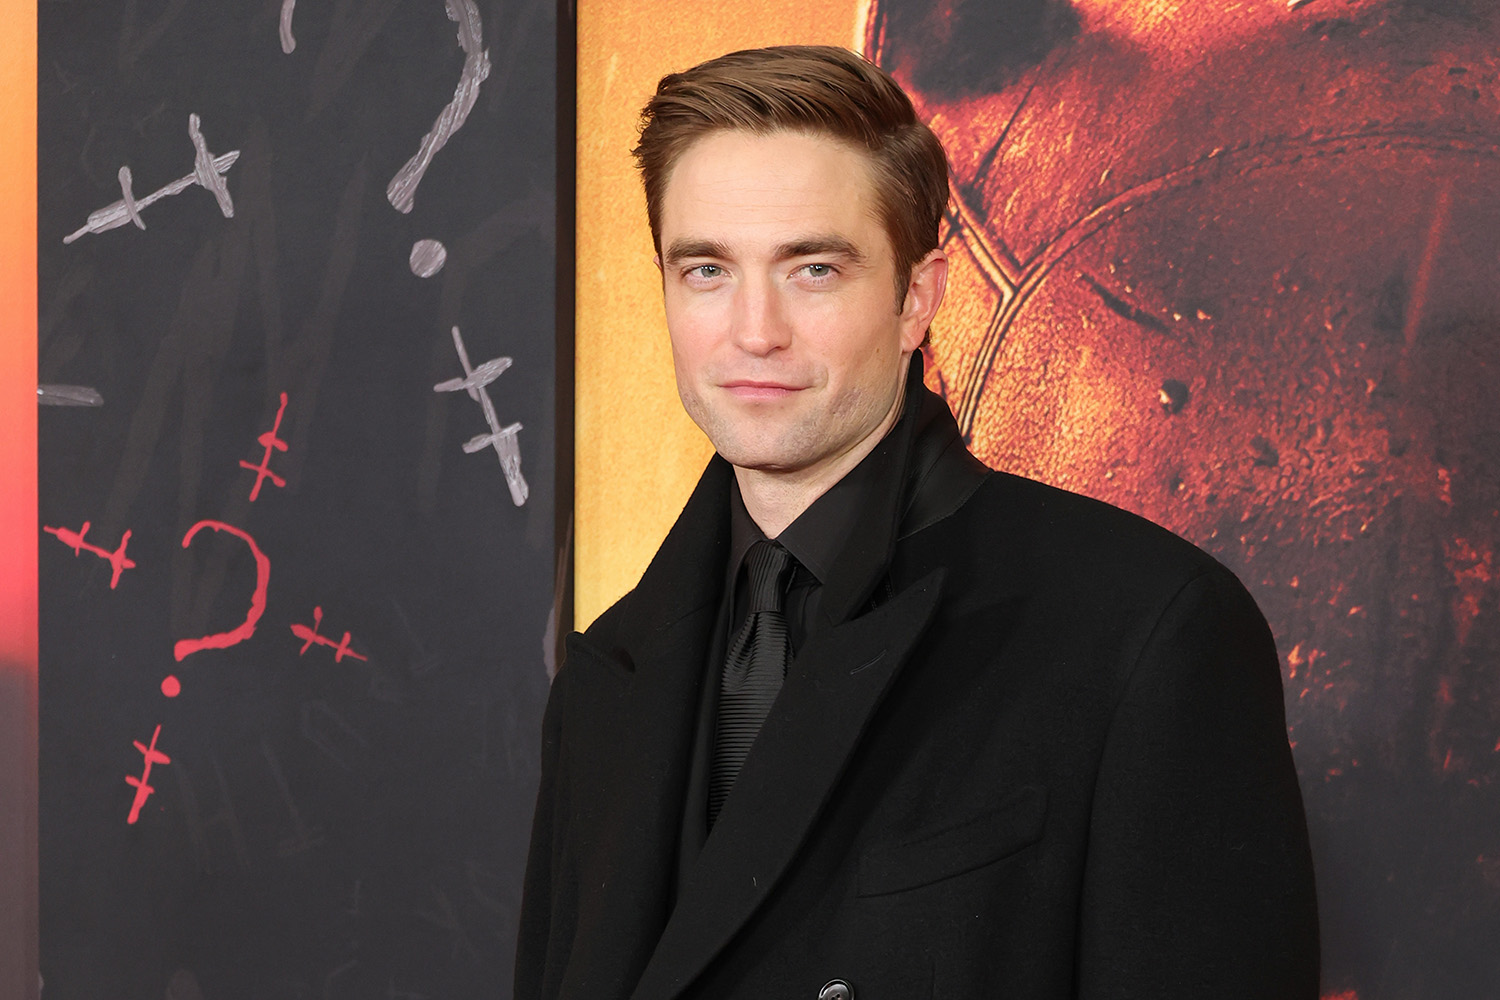 Robert Pattinson attends 'The Batman' world premiere after taking up the mantle of Bruce Wayne and getting a new Batman suit